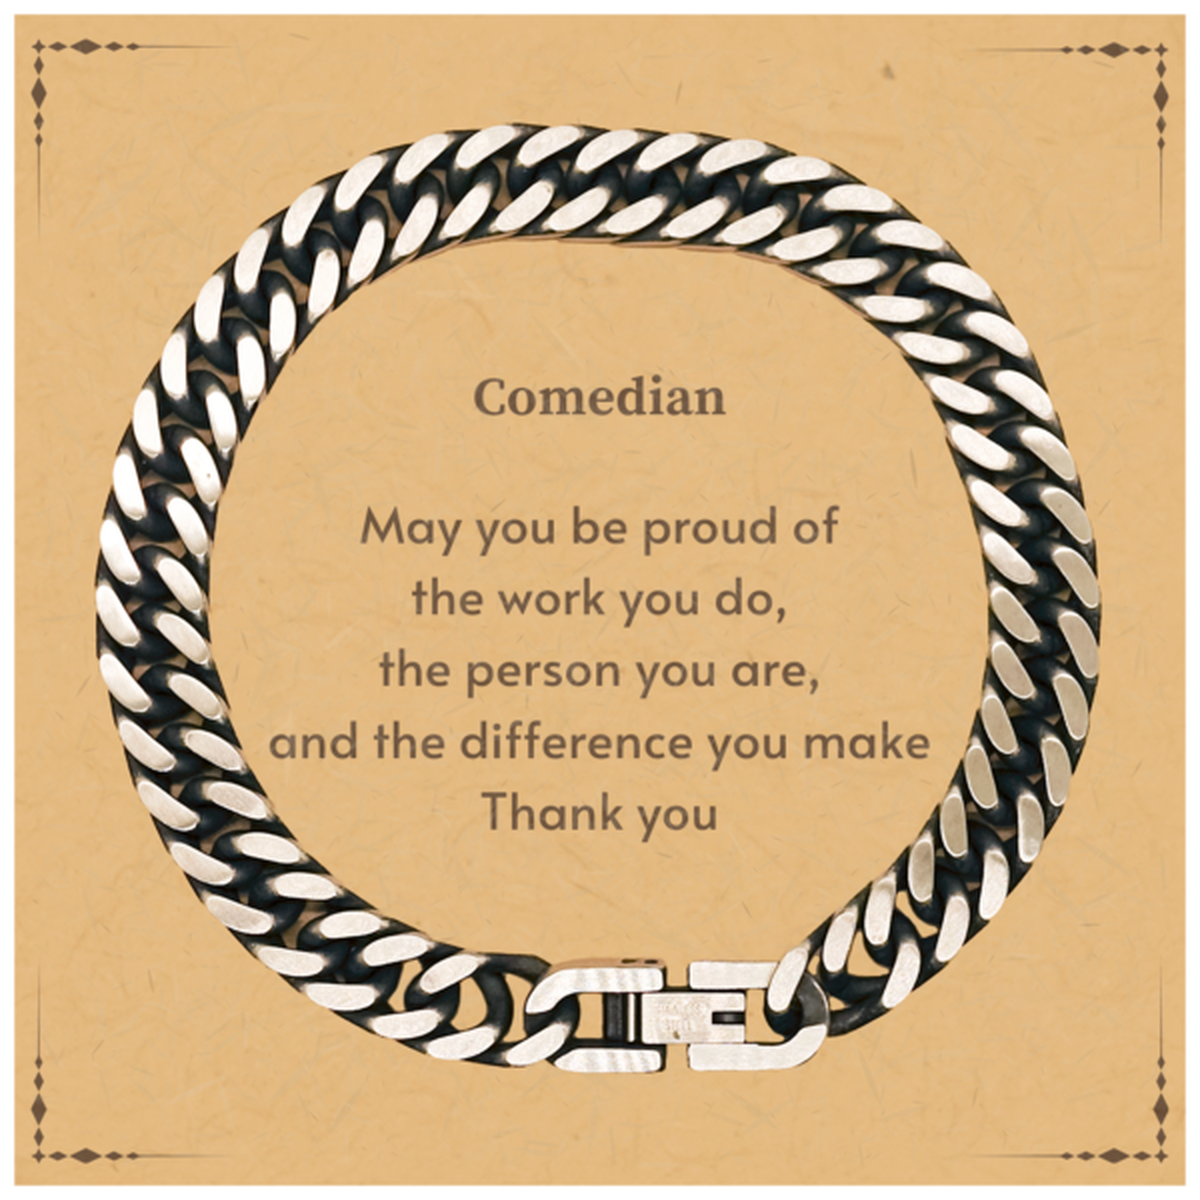 Heartwarming Cuban Link Chain Bracelet Retirement Coworkers Gifts for Comedian, Comedian May You be proud of the work you do, the person you are Gifts for Boss Men Women Friends